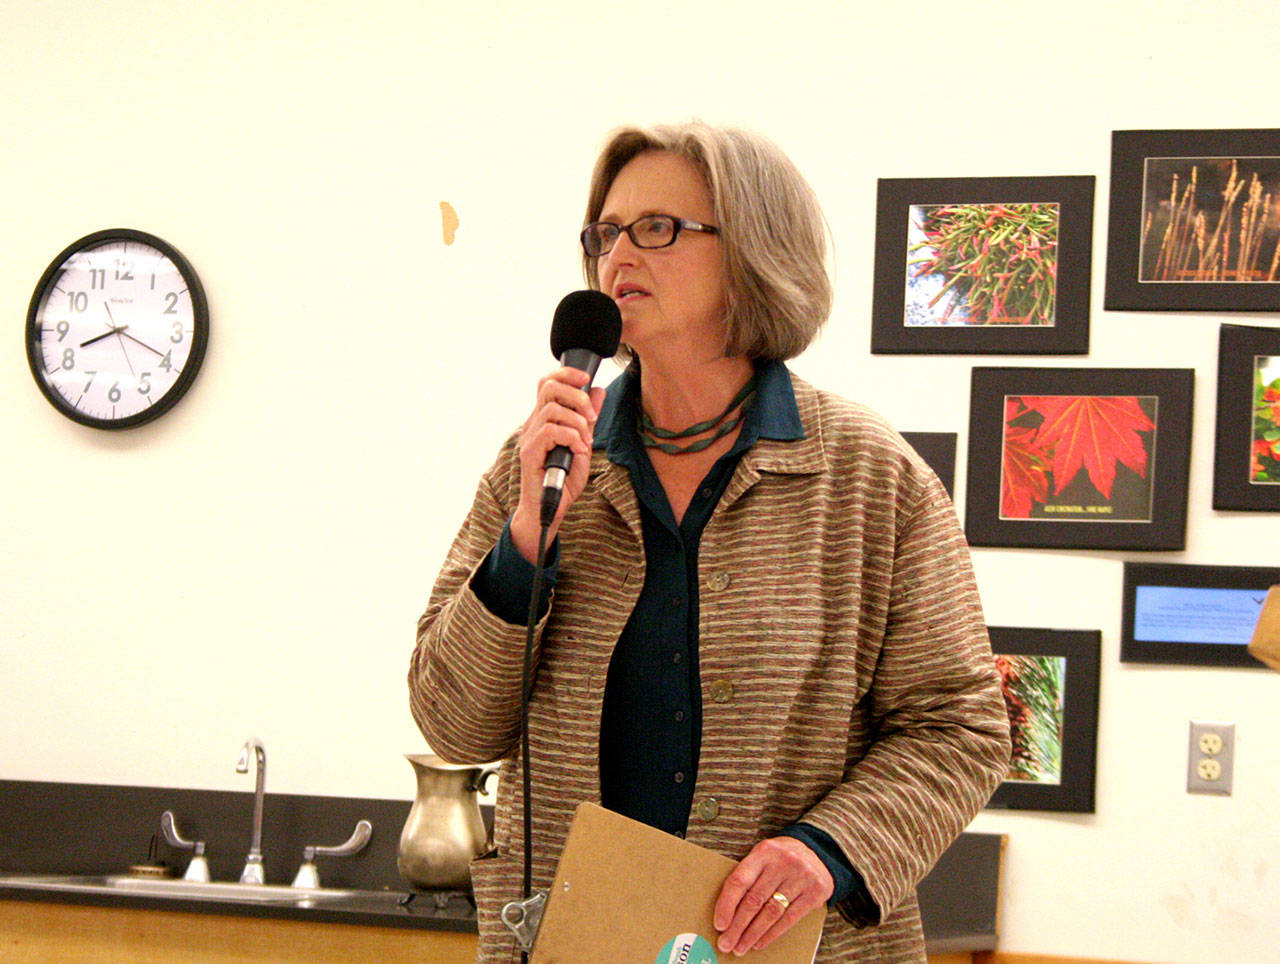 Deborah Stinson, the incumbent for the Port Townsend City Council Position 4, speaks Thursday night during a League of Women Voters candidates’ forum at the Port Townsend Community Center. (Brian McLean/Peninsula Daily News)